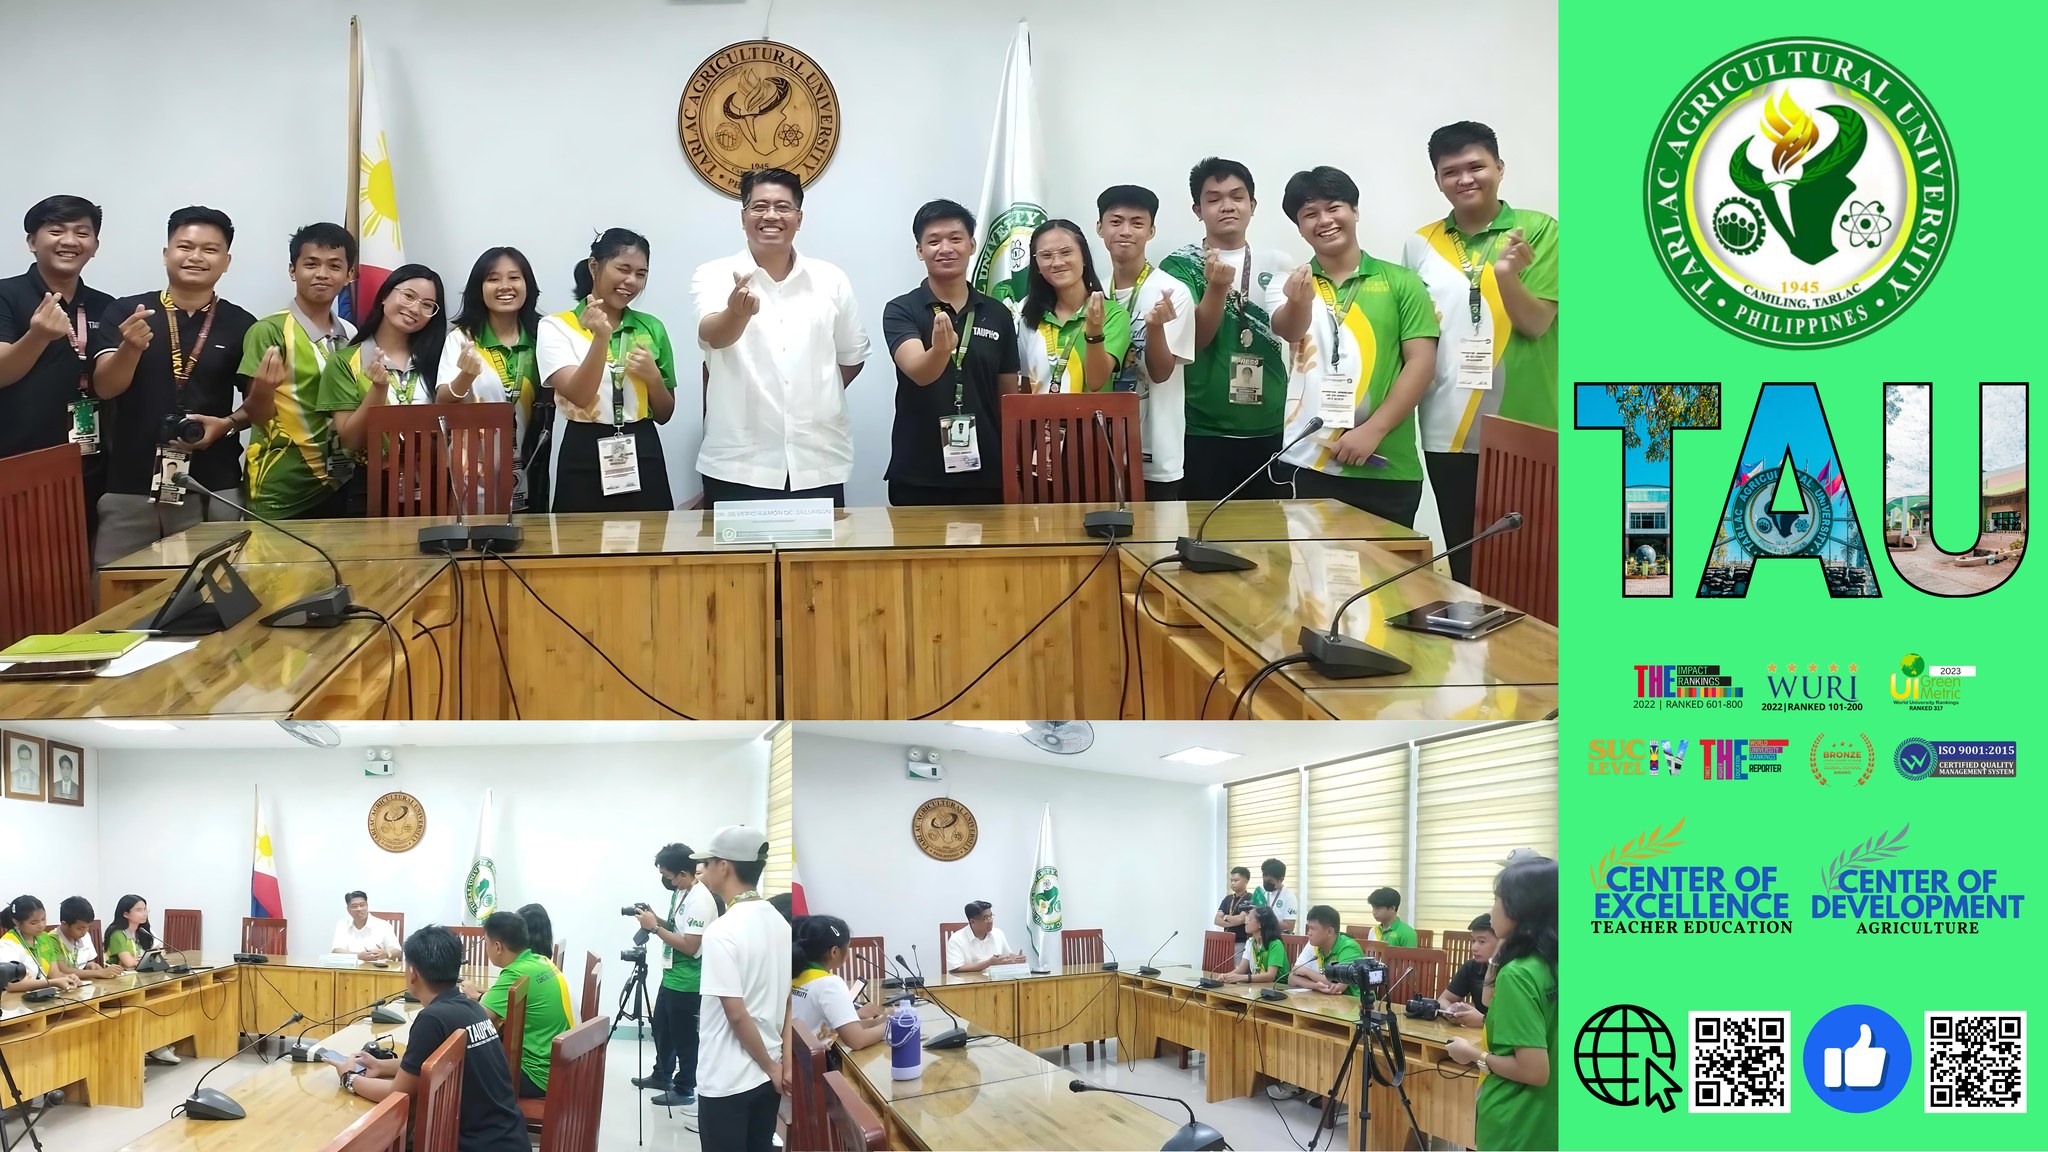 𝐂𝐀𝐏𝐓𝐔𝐑𝐄𝐃 𝐈𝐍 𝐋𝐄𝐍𝐒 | In an exclusive interview conducted on 4 July by members of The Golden Harvest, the official tertiary student publication of the Tarlac Agricultural University (TAU), newly elected University President, Dr. Silverio Ramon DC. Salunson, a seasoned educator and administrator with decades of experience in higher education, shares his insights and details his strategies for the University's future.